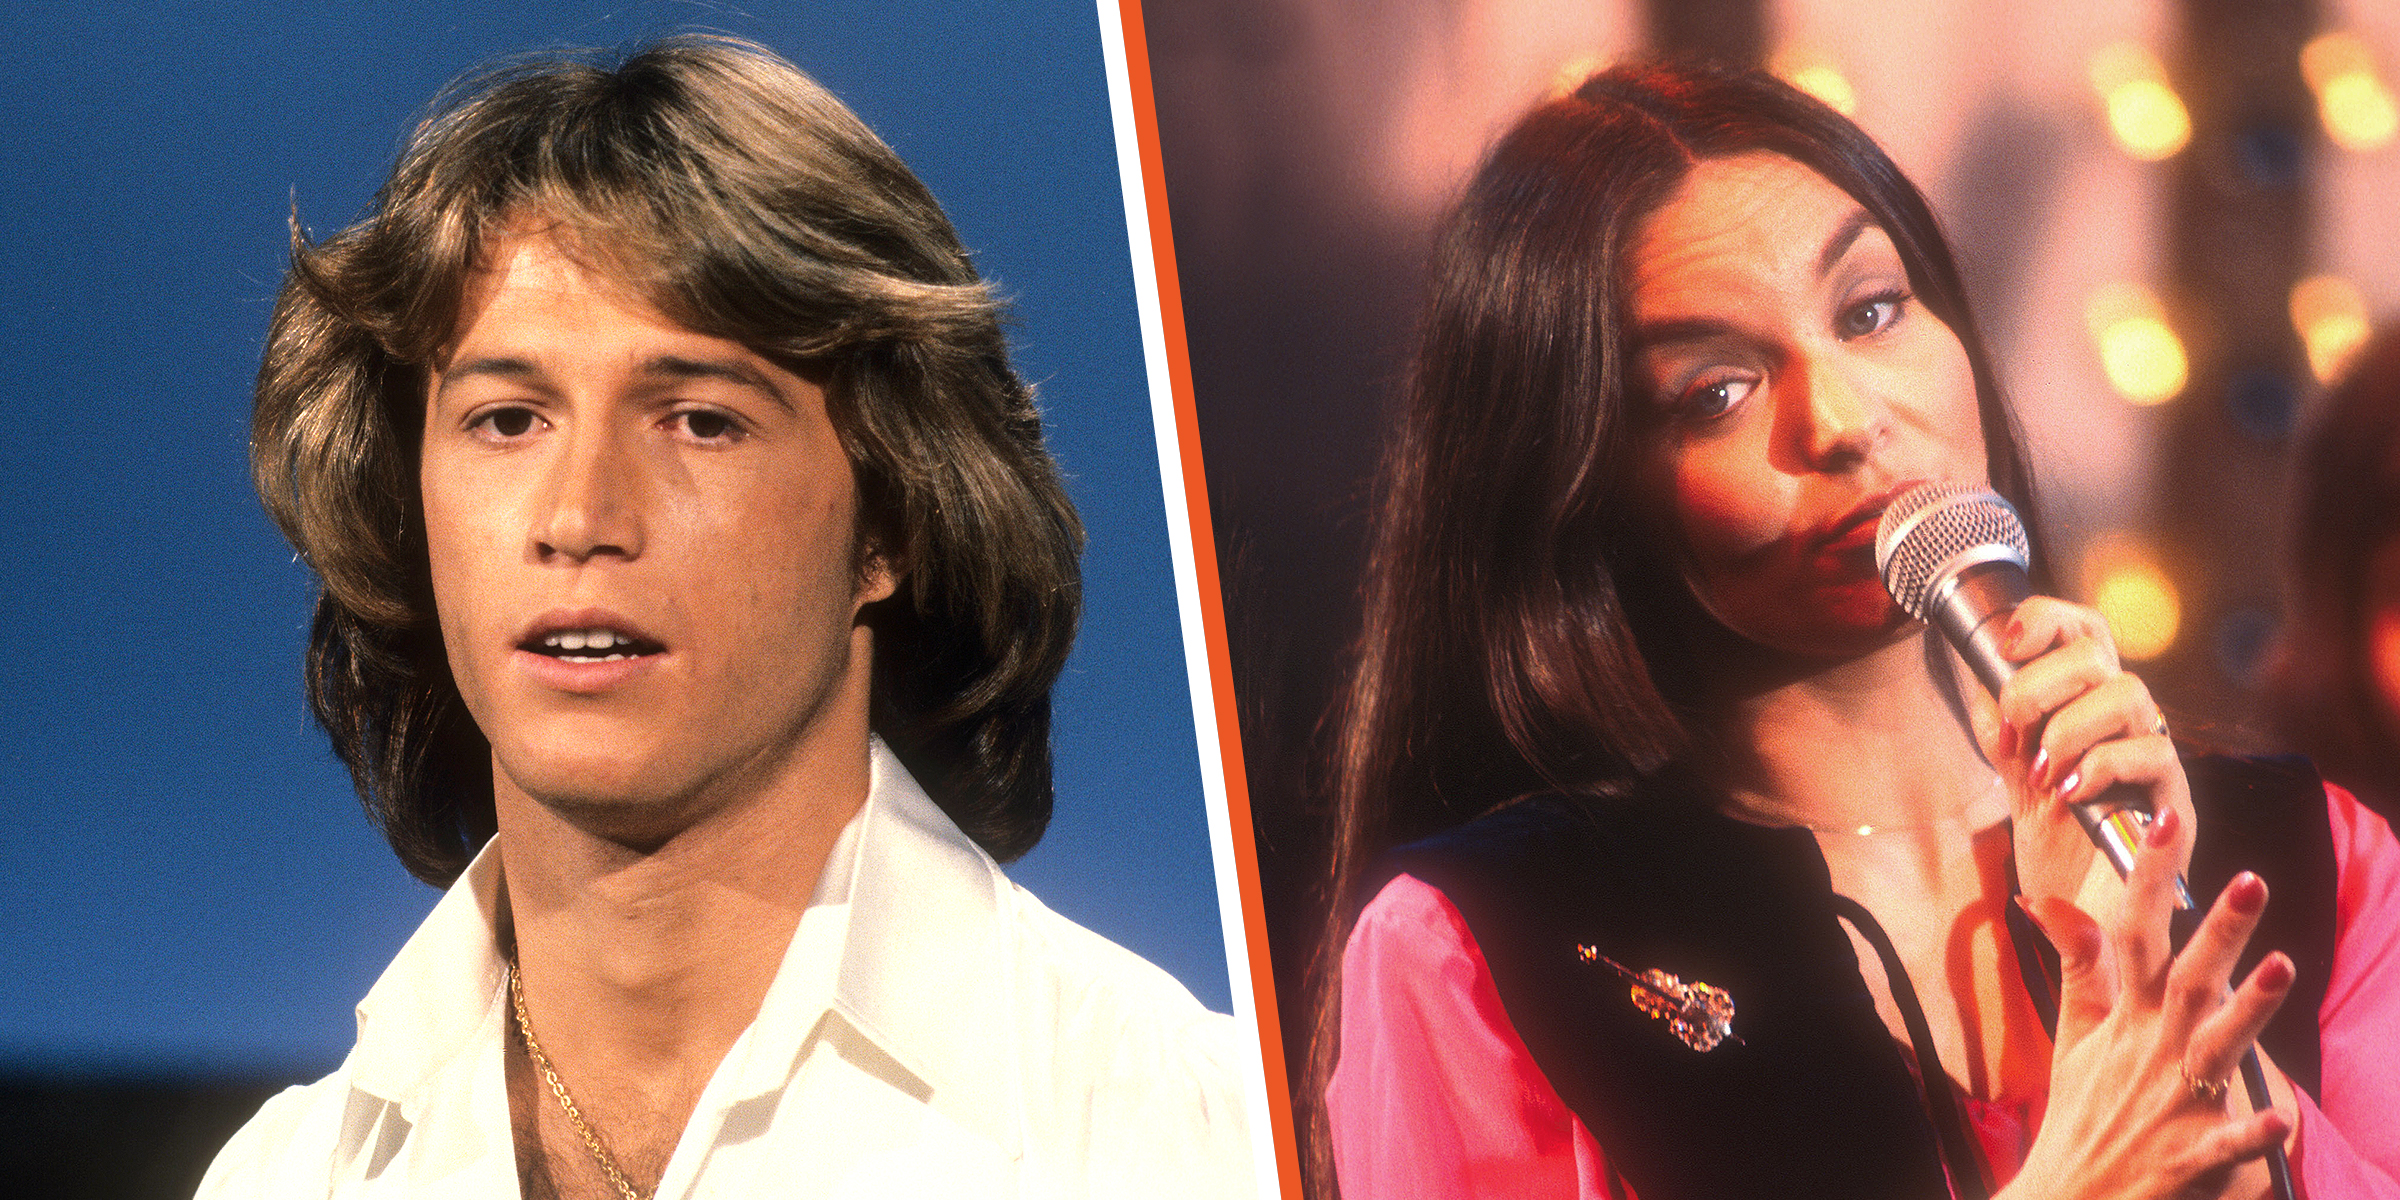 Andy Gibb y Crystal Gayle cantan a dúo. | Foto: Getty Images